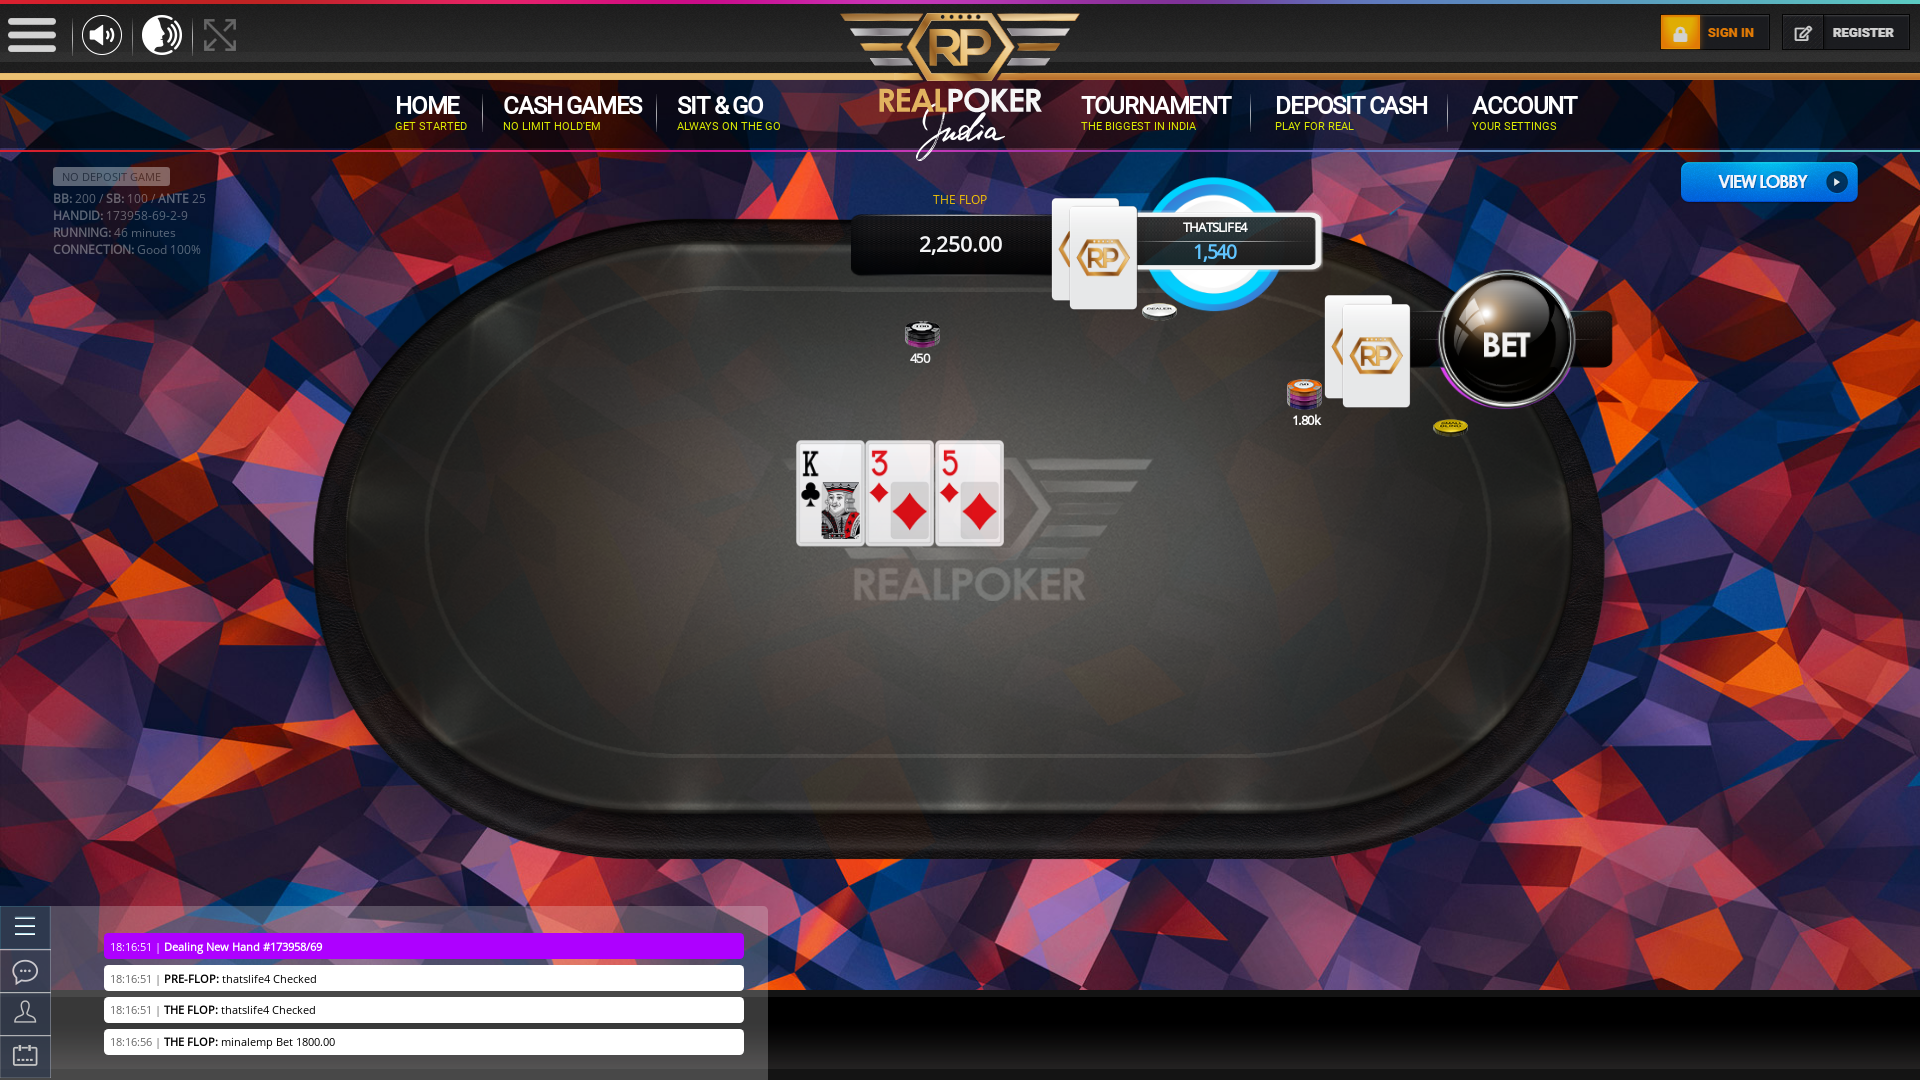 Real Indian poker on a 10 player table in the 46th minute of the game